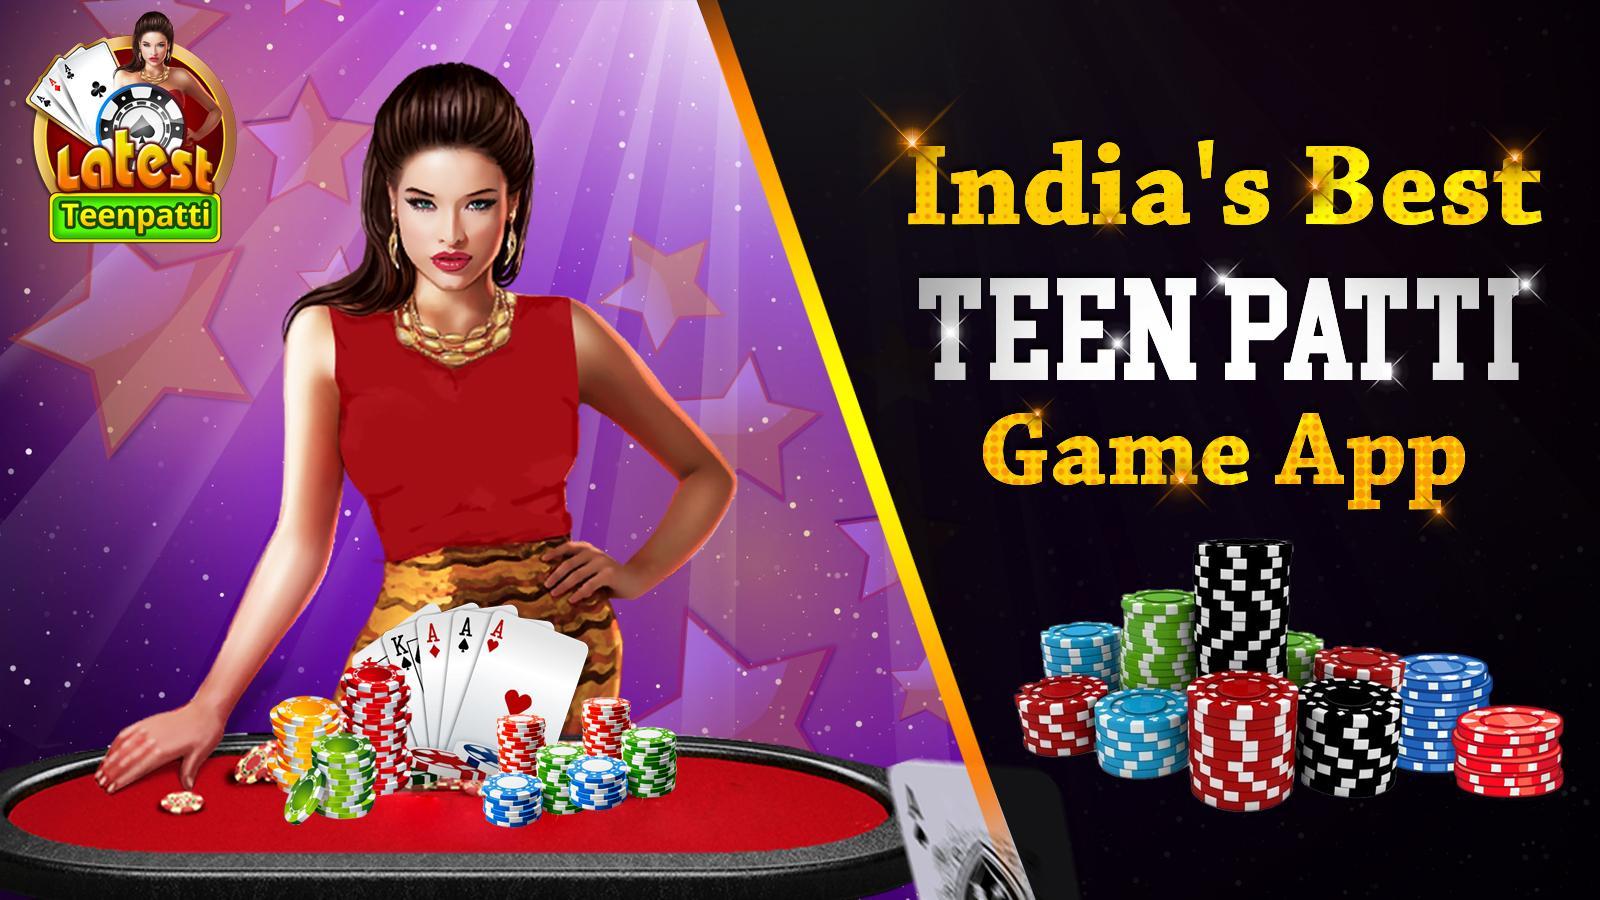 Latest Teen Patti for Android - APK Download